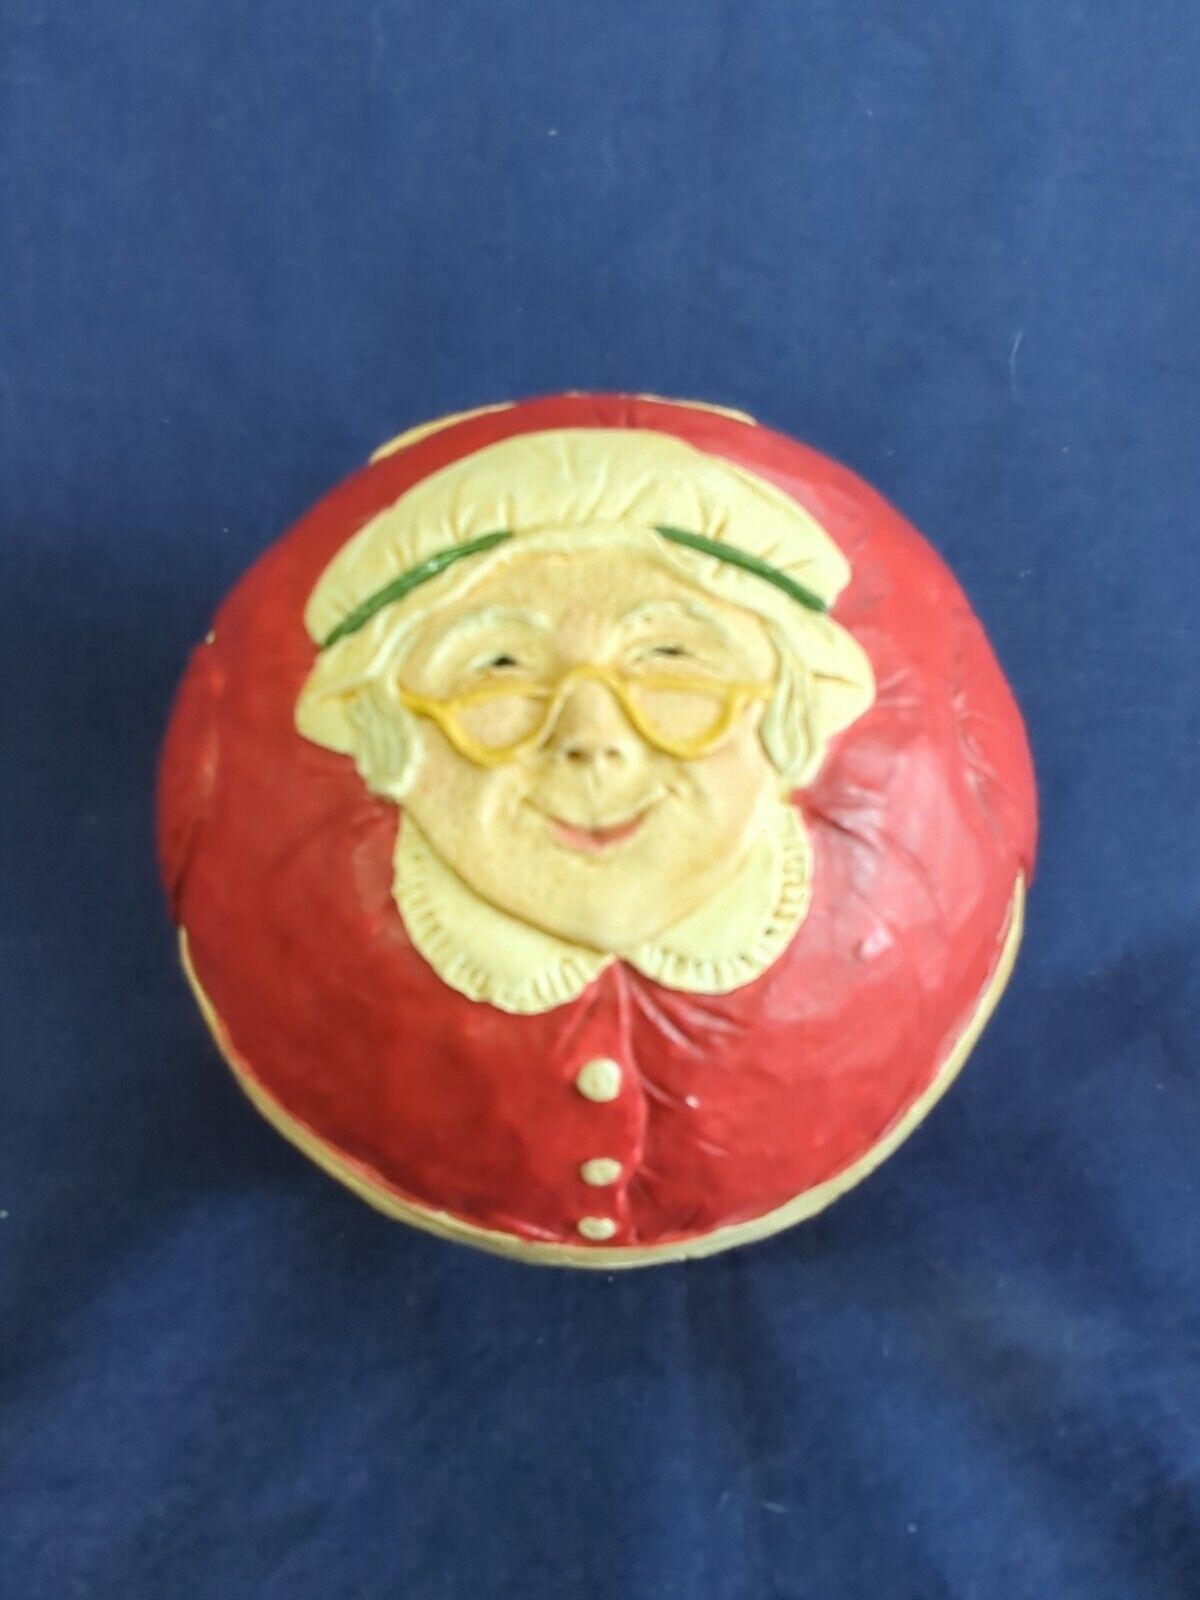 BRIERE Folk Art Pull Toy 1988 Mrs Claus Ball (Good condition)